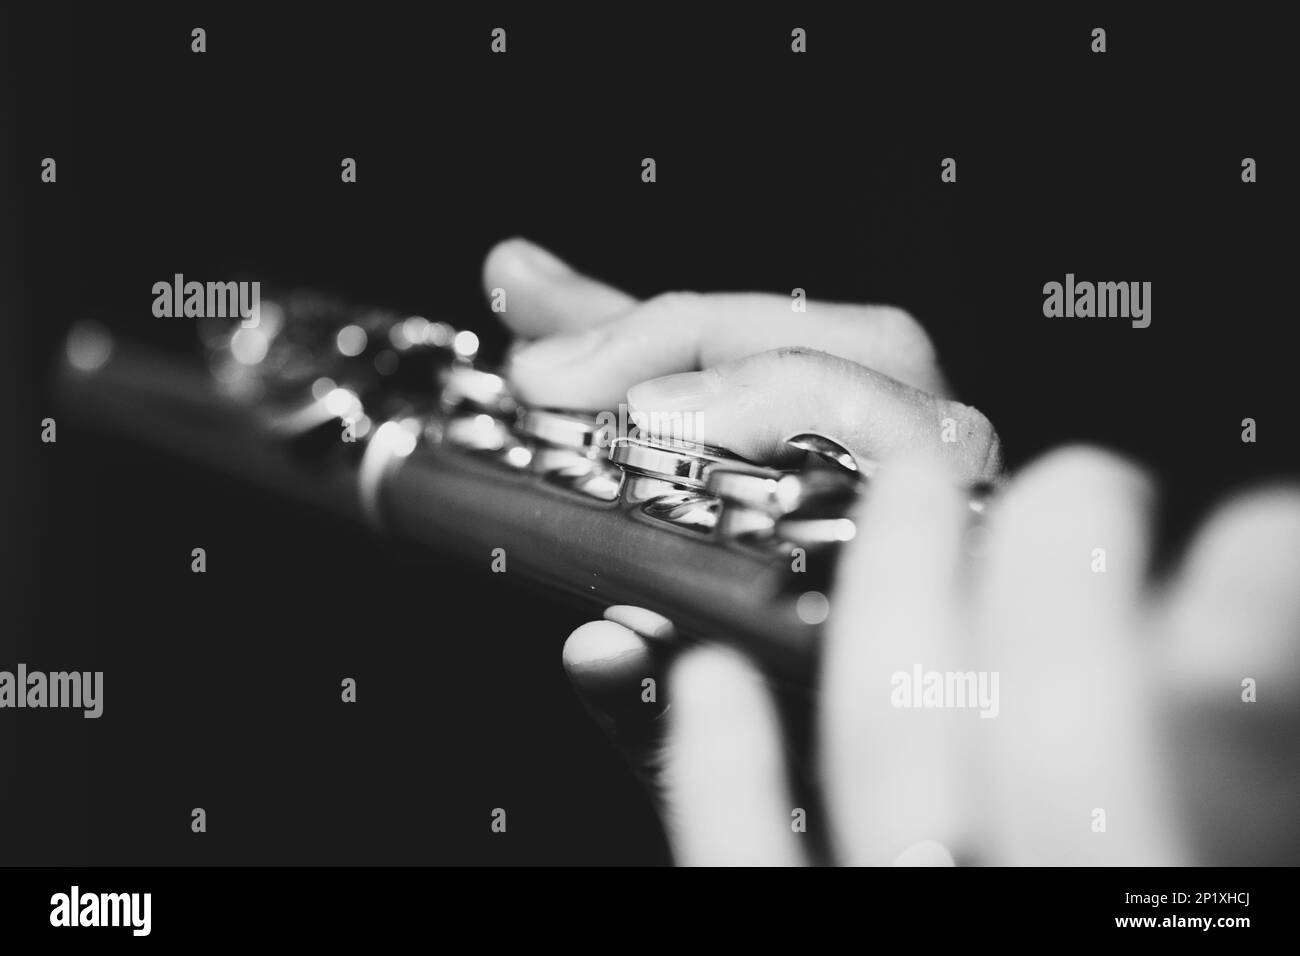 A black and white portrait of the fingers of a hand of a flutist musician gripping down on the valves of a silver metal flute to play a note of a musi Stock Photo